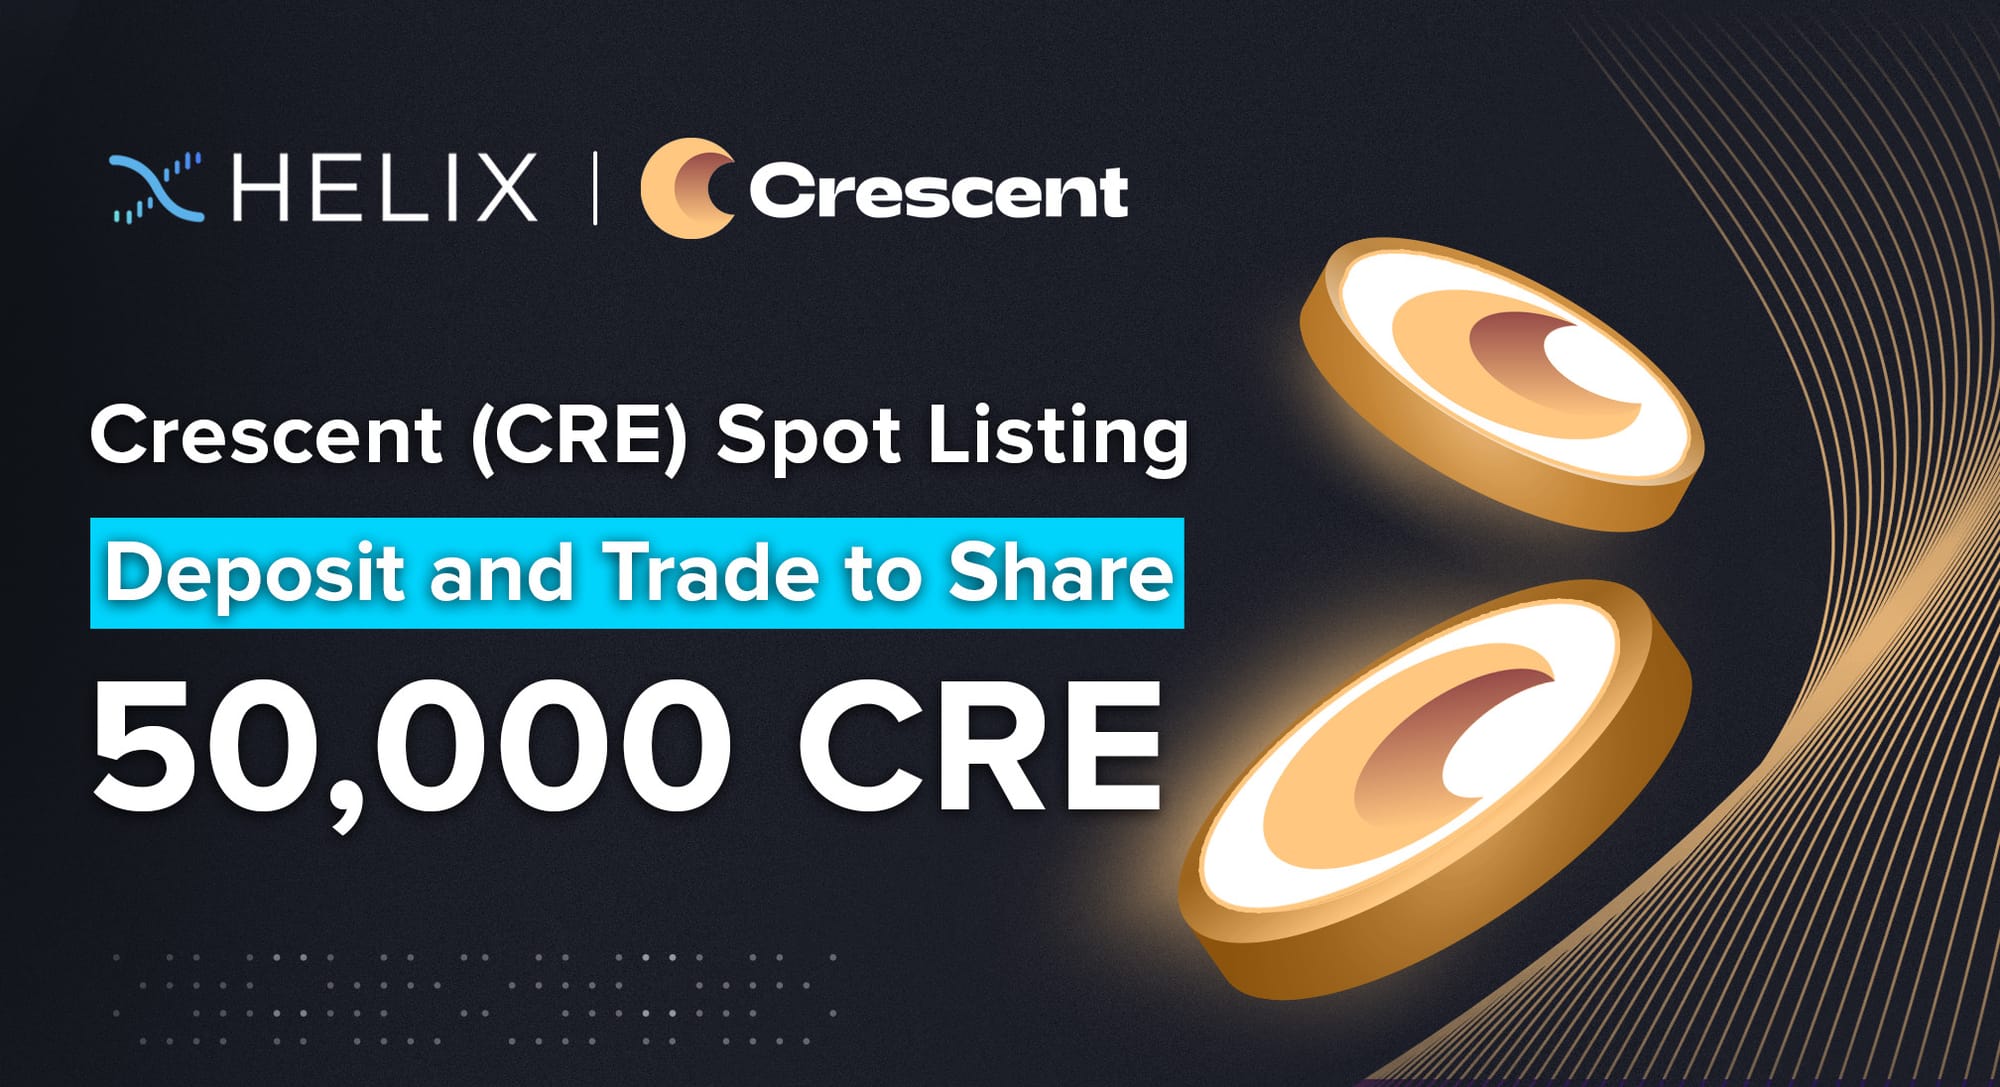 [CLOSED] Decentralized Crescent (CRE) Spot Market Listing on Helix with 50,000 CRE in Prizes